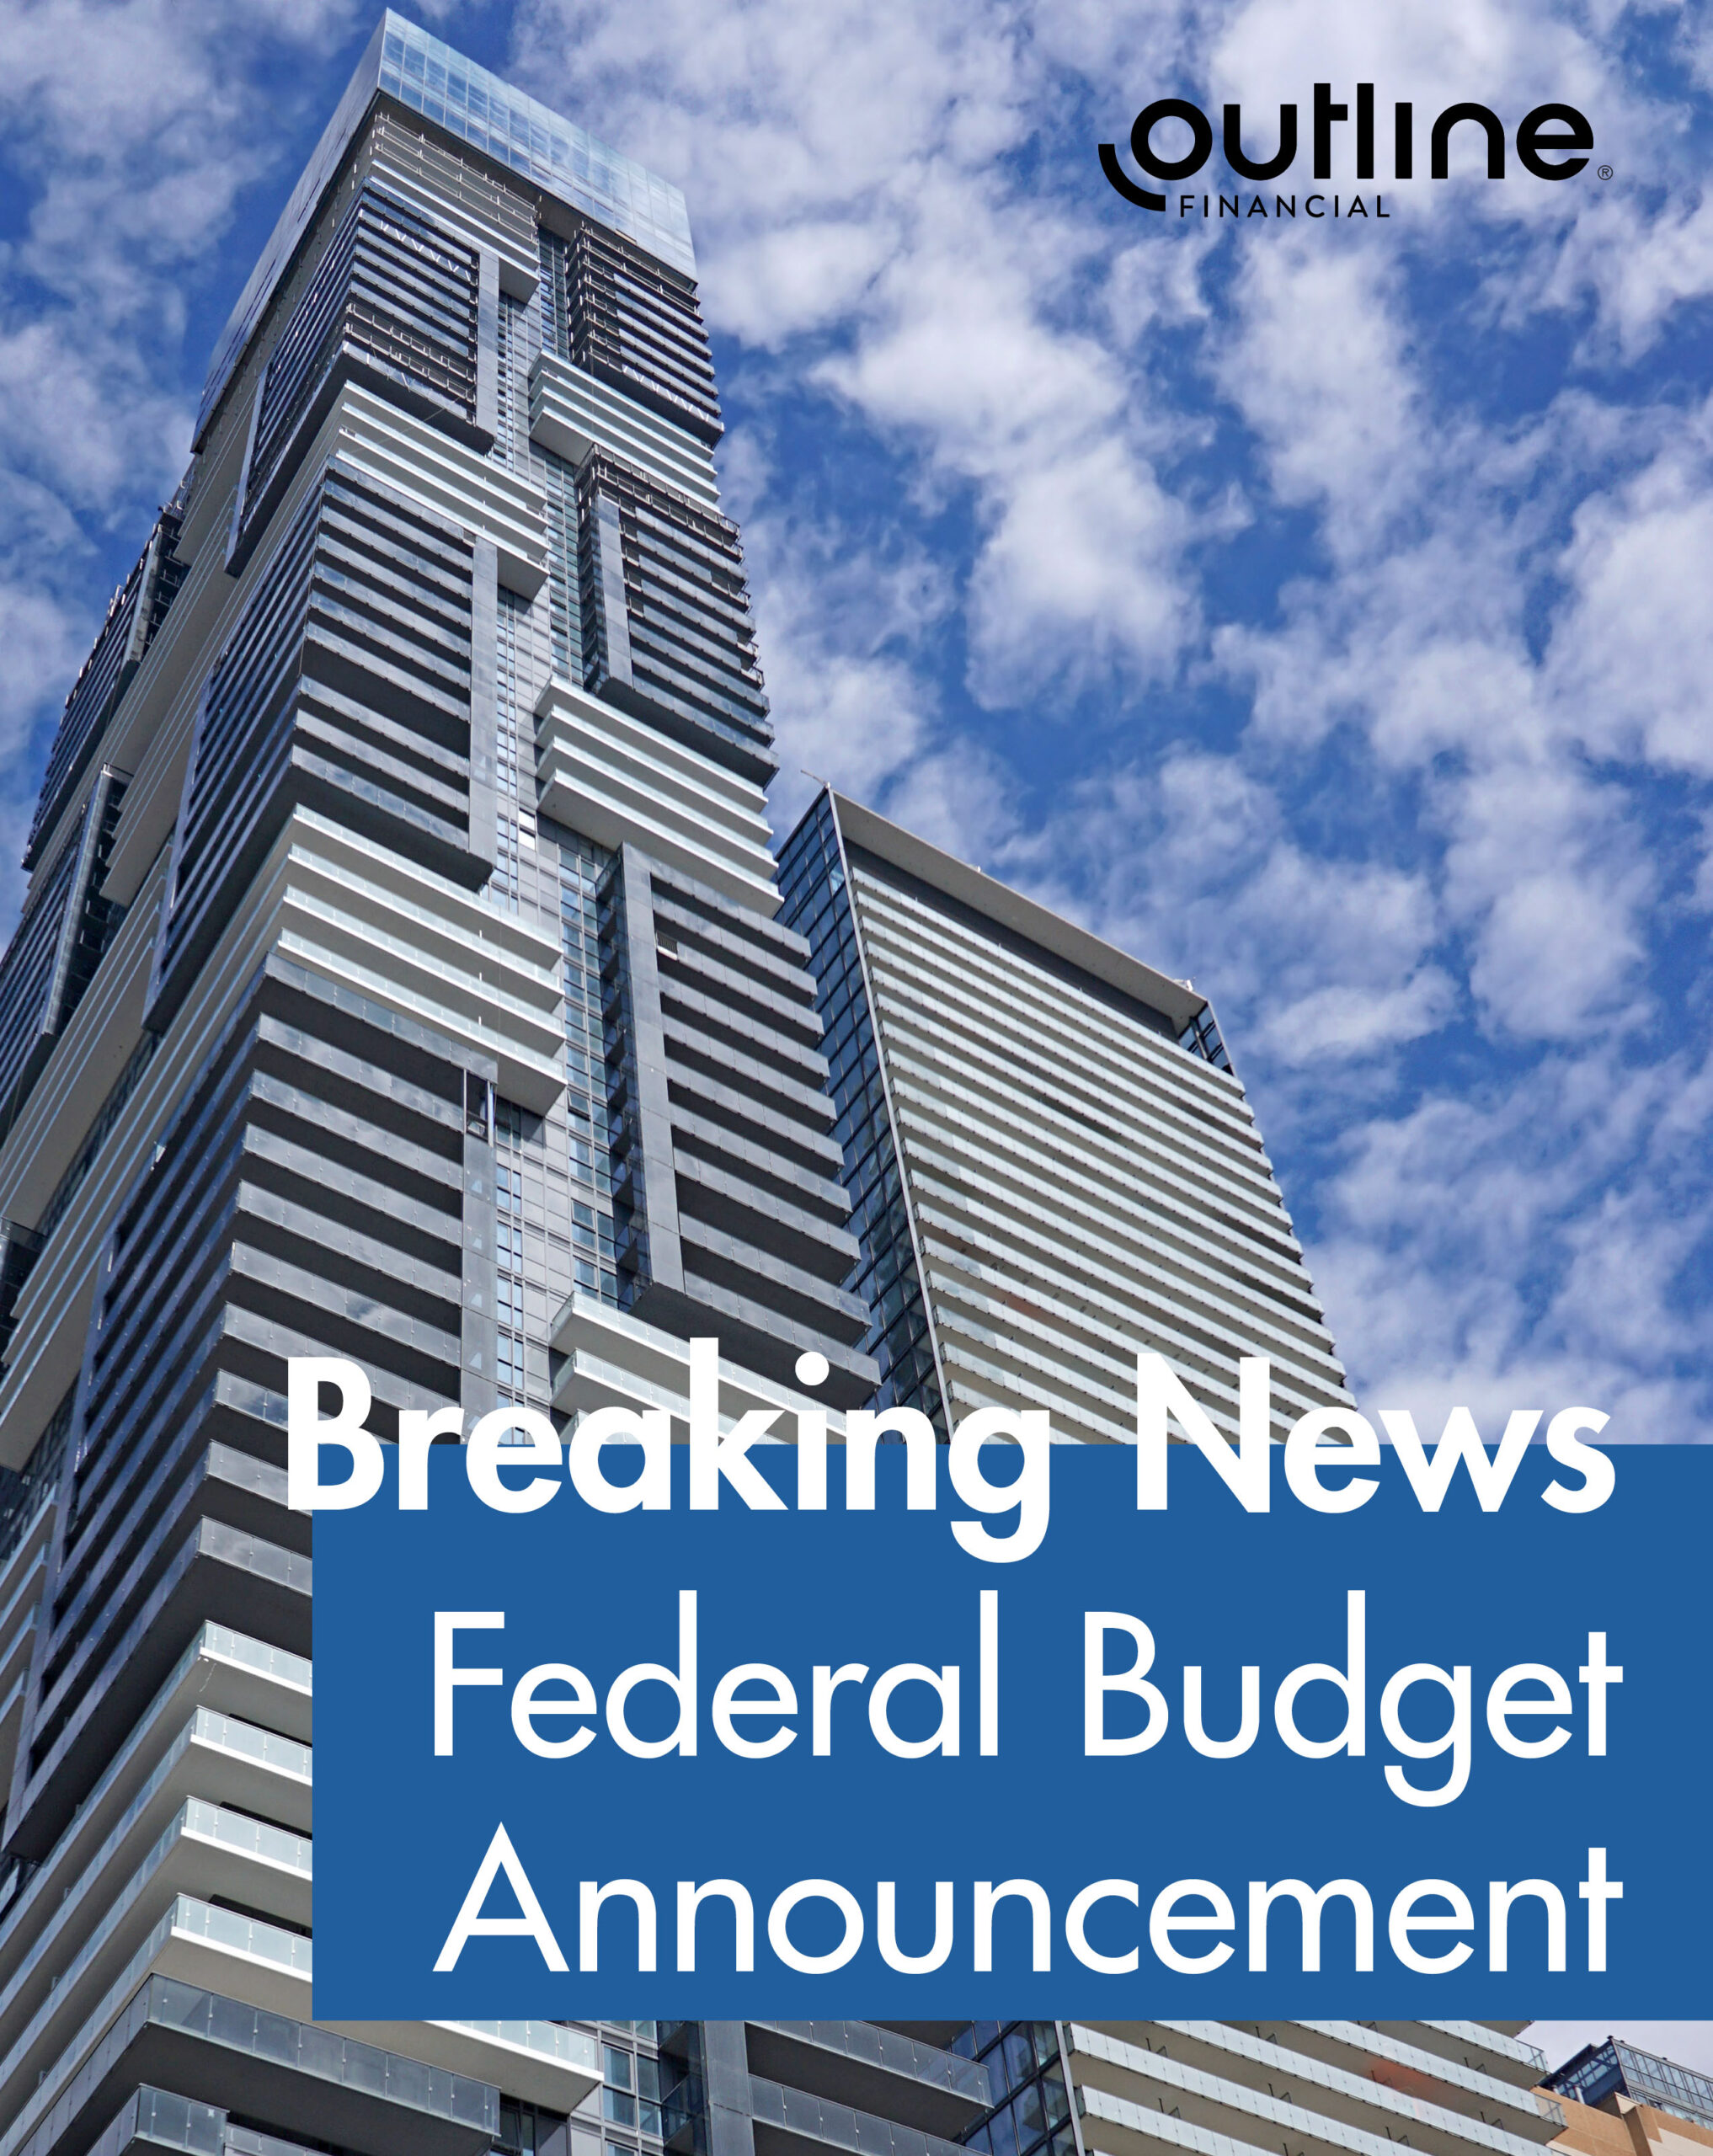 Government Targets Improved Housing Affordability - Outline Financial - Mortgages, Insurance, Advisory